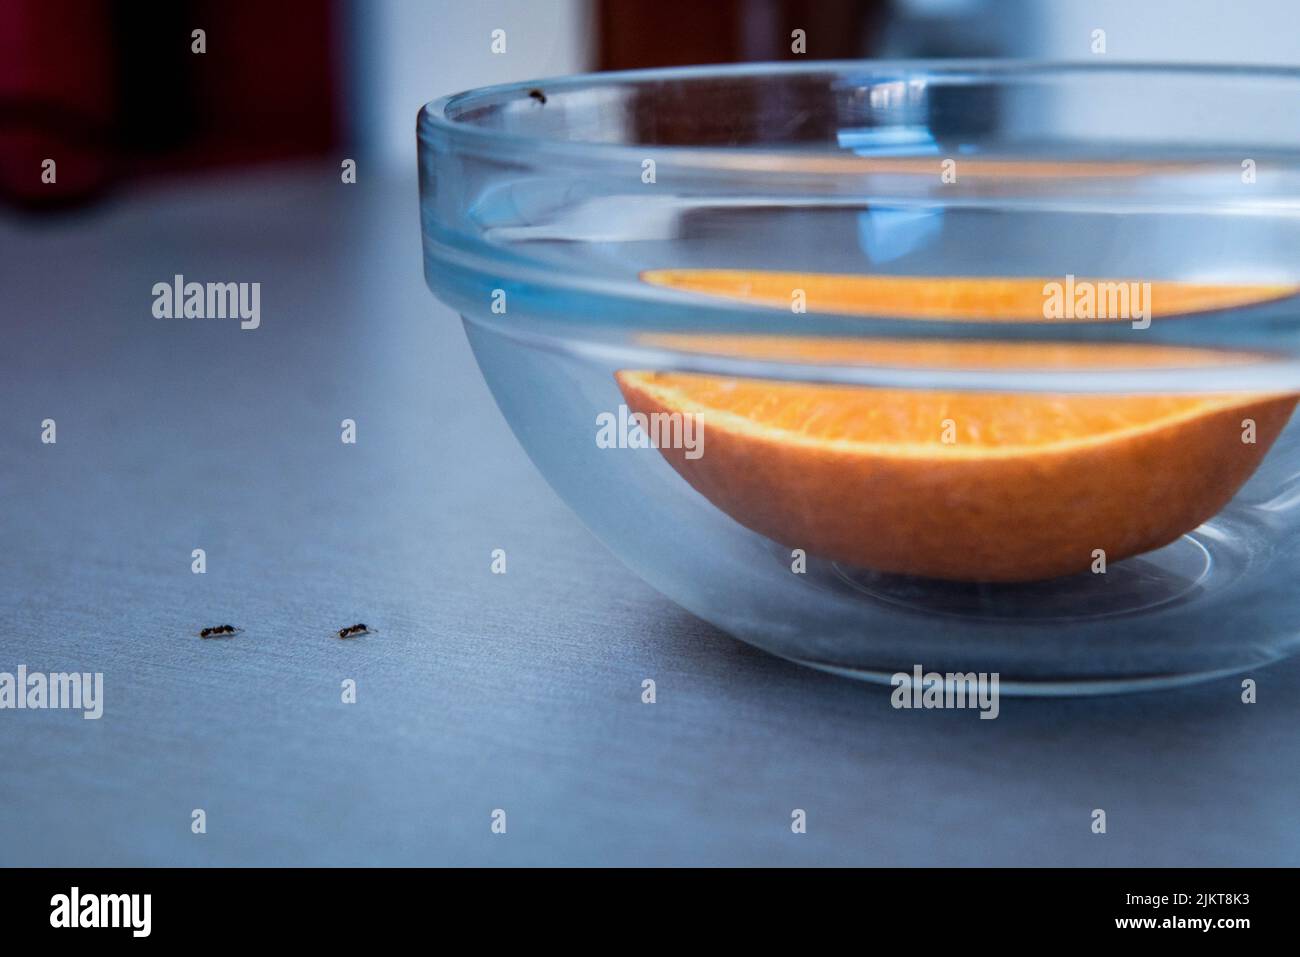 Picture of Detail of Two Ants Parading on a Table to Eat an Orange. Insect Fumigation Problem at Home Stock Photo